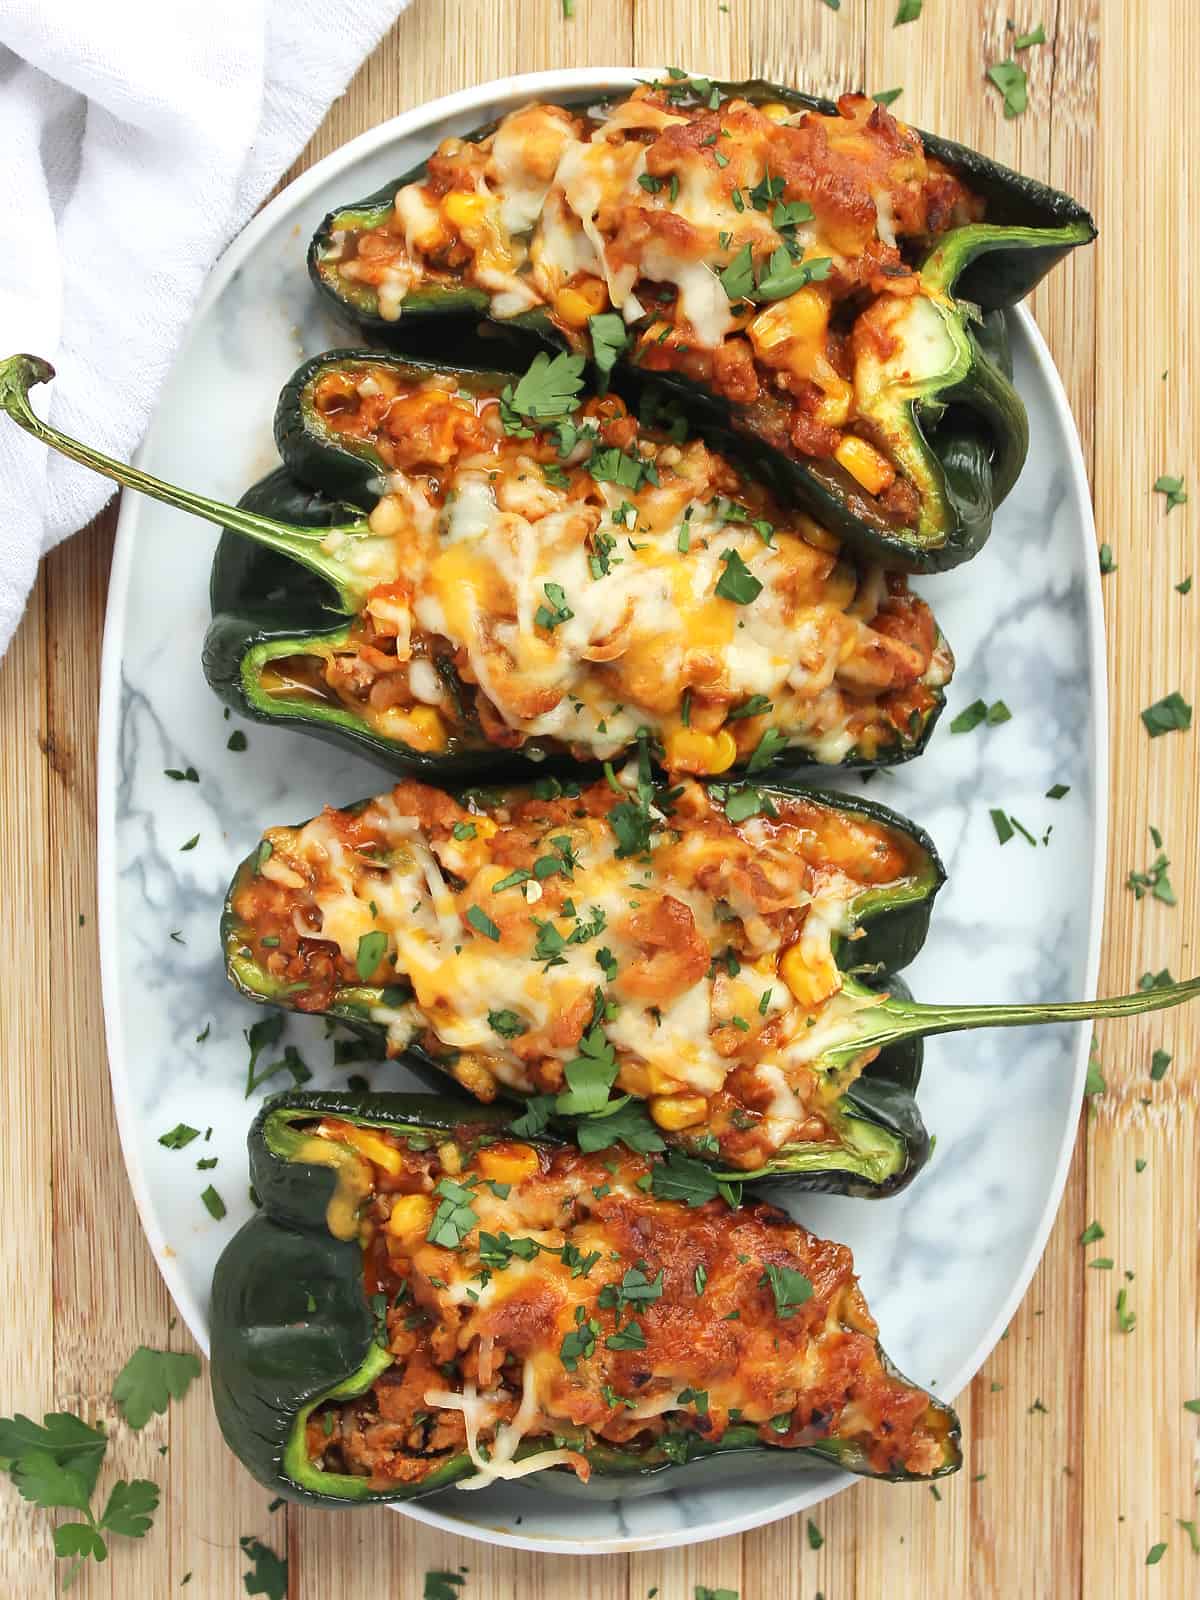 Stuffed poblano pappers on a serving plate on a wooden chopping board.